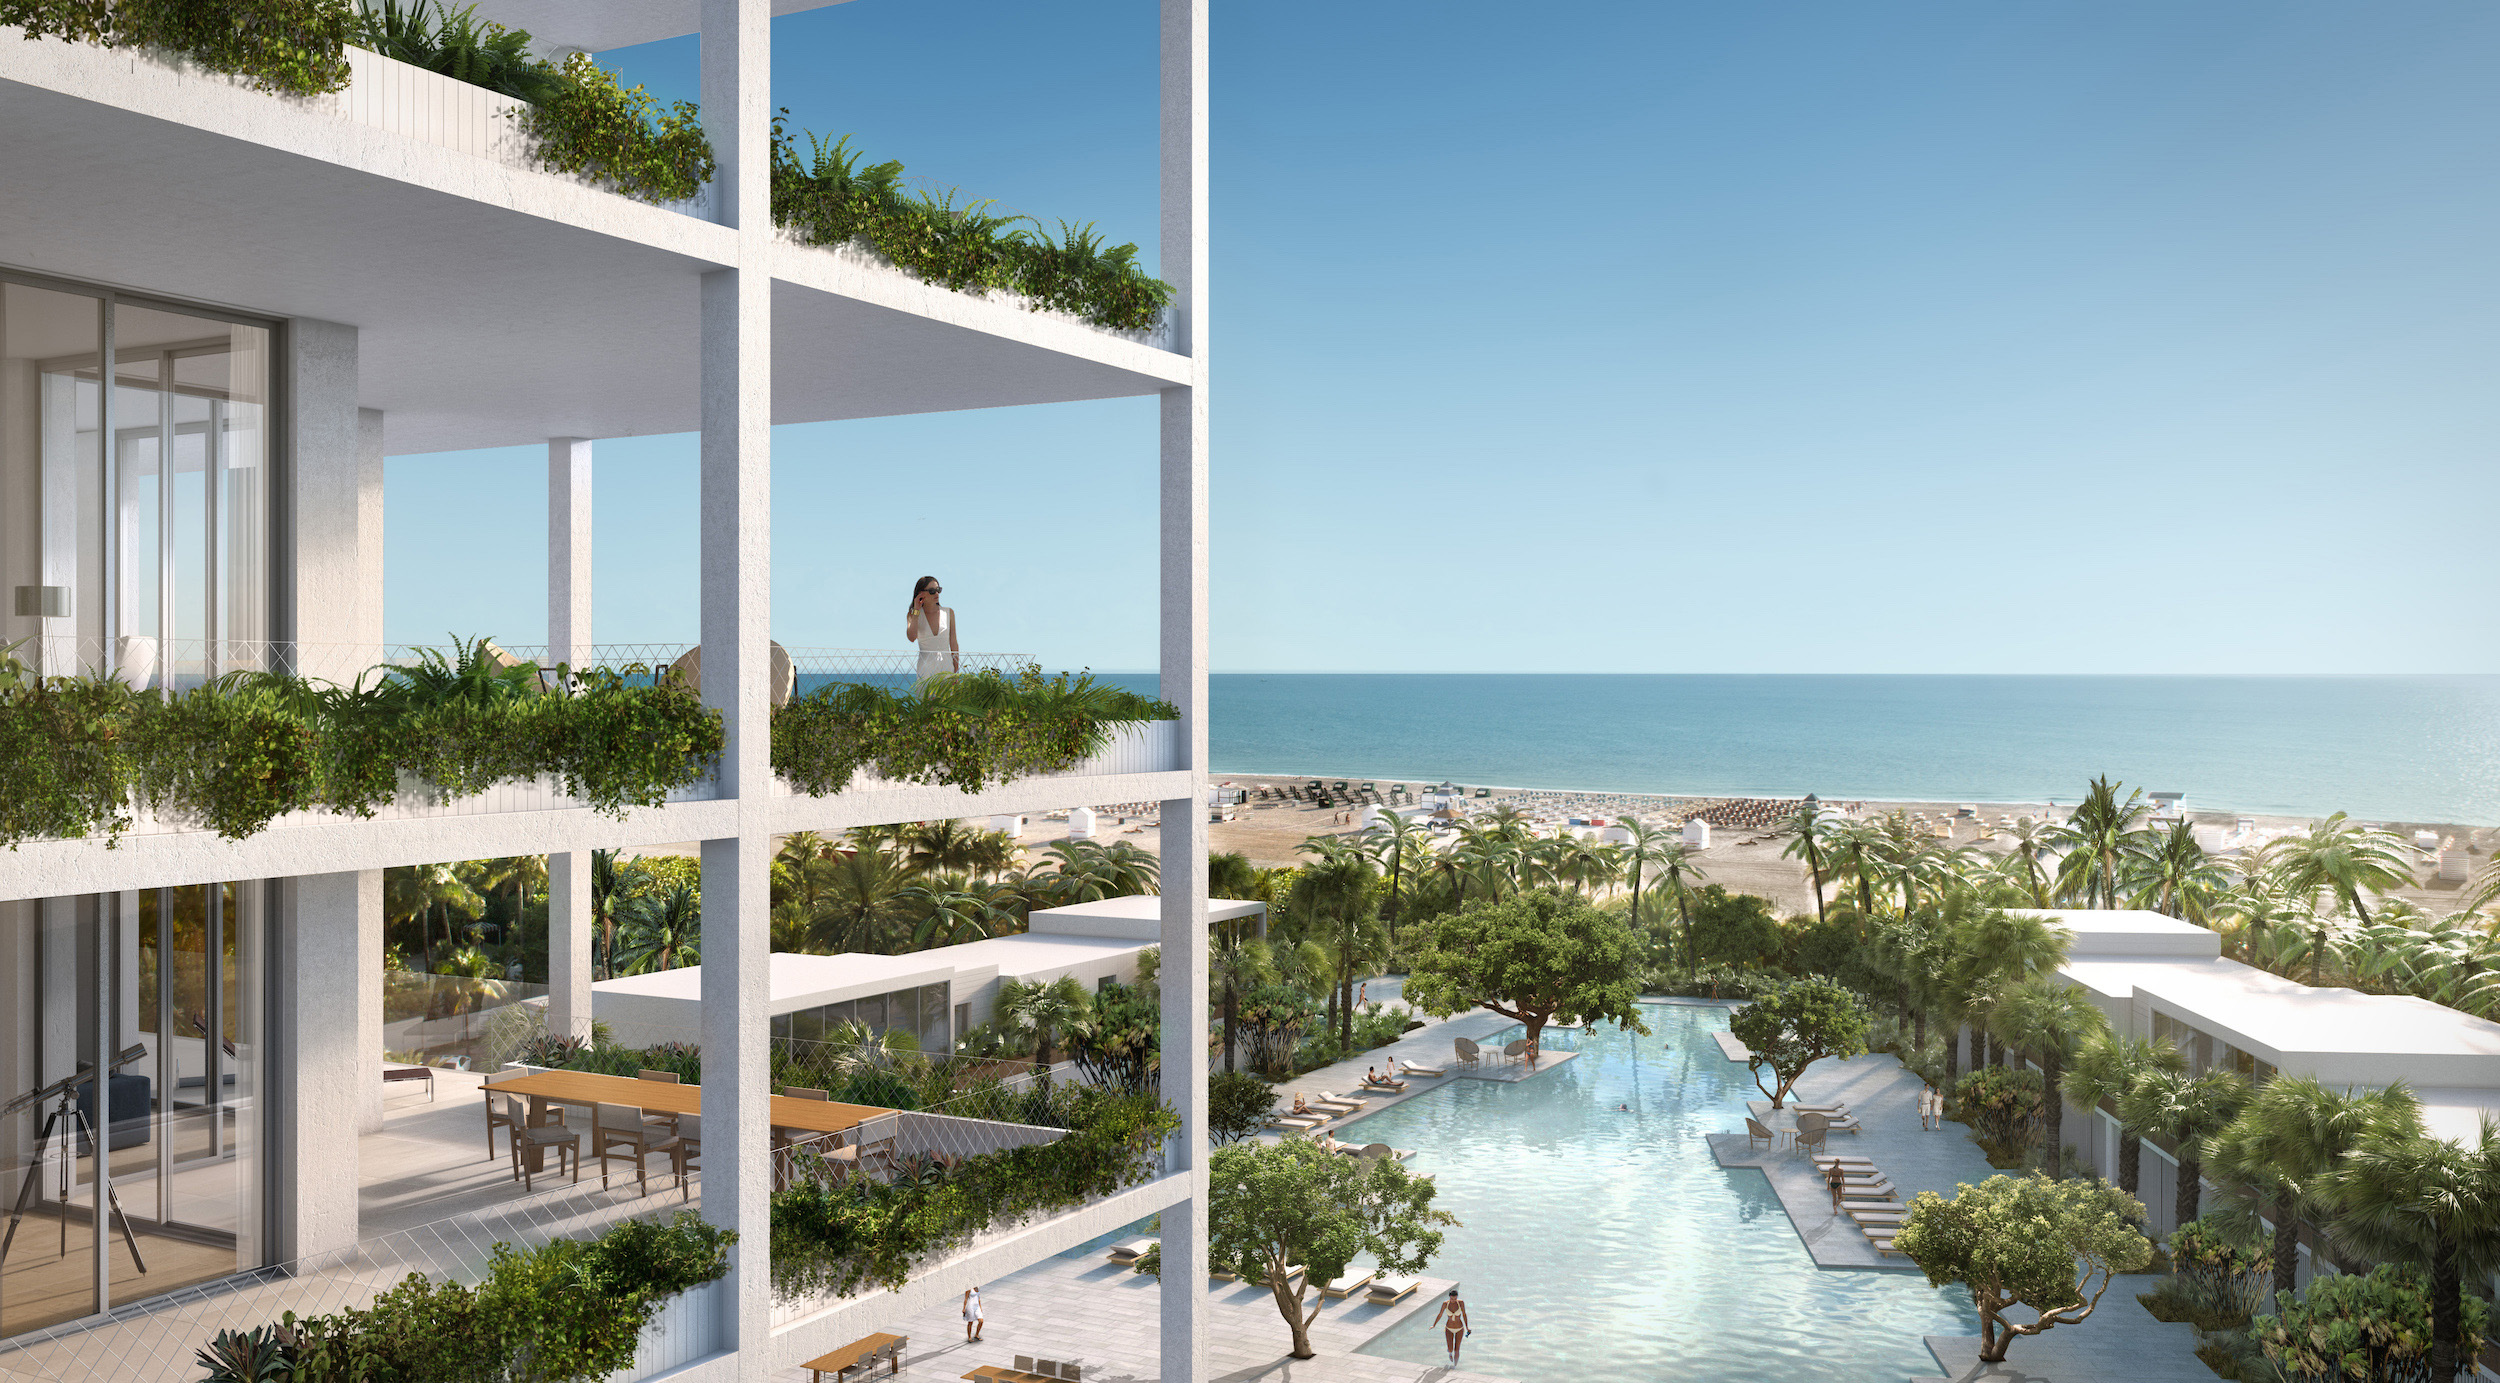 Fasano Hotel + Residences at Shore Club - southeast balcony rendering by Visualhouse